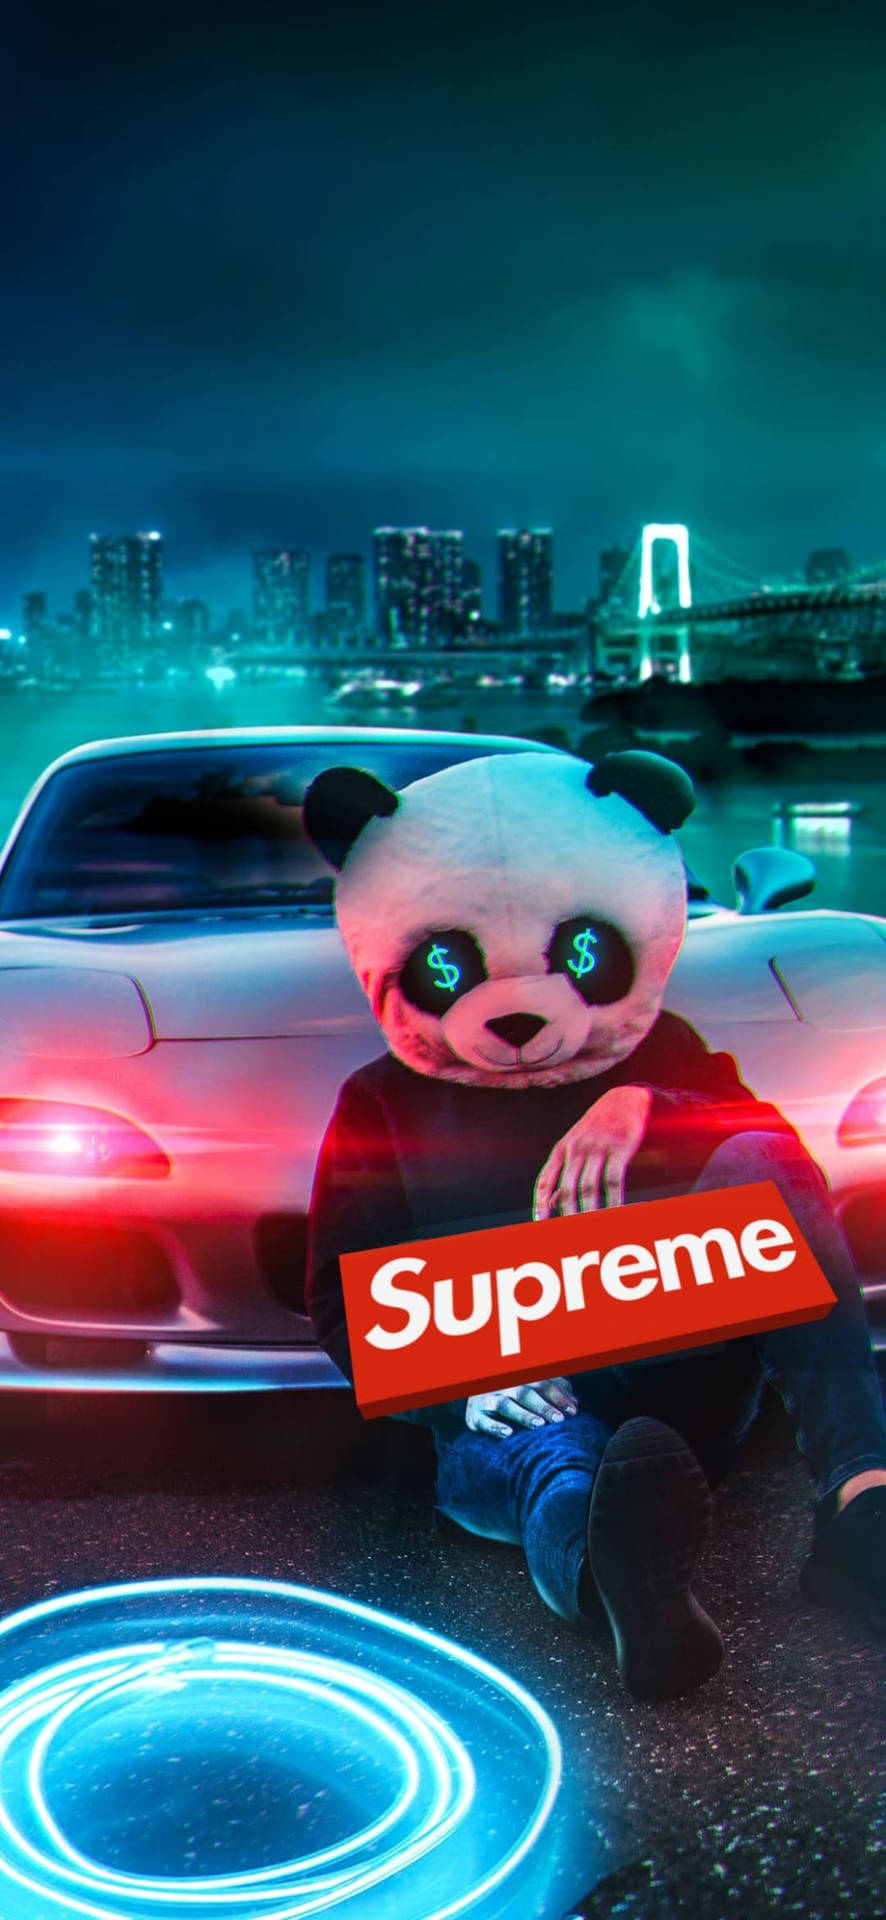 Download Epic Red Supreme With Panda Wallpaper